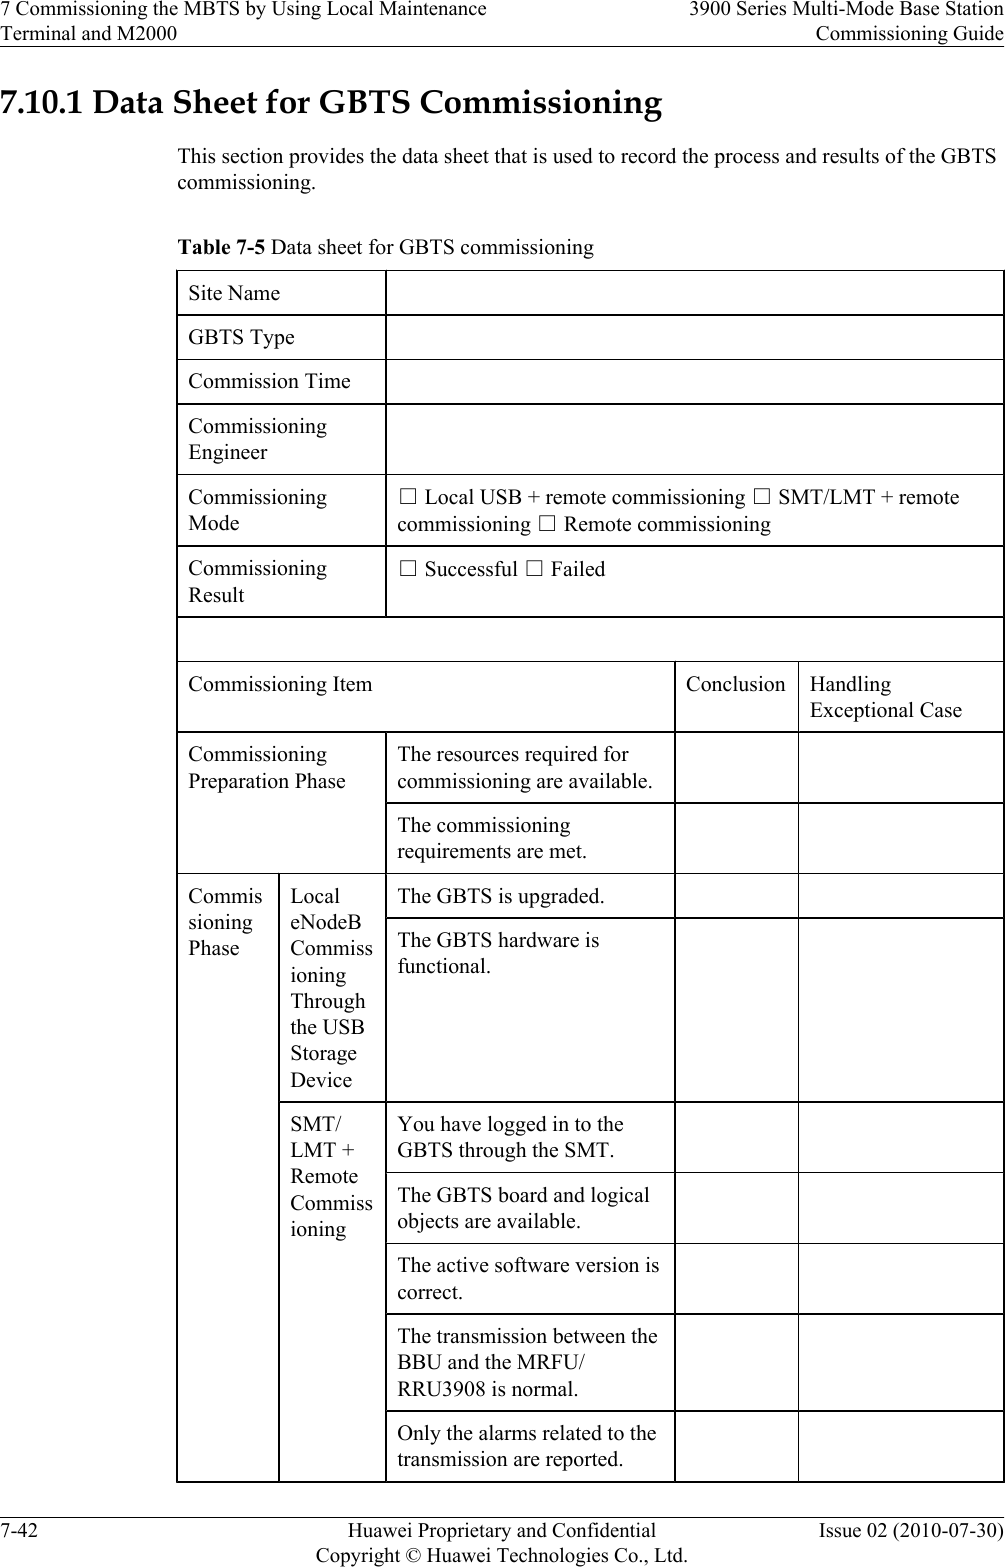 7.10.1 Data Sheet for GBTS CommissioningThis section provides the data sheet that is used to record the process and results of the GBTScommissioning.Table 7-5 Data sheet for GBTS commissioningSite Name  GBTS Type  Commission Time  CommissioningEngineer CommissioningMode□ Local USB + remote commissioning □ SMT/LMT + remotecommissioning □ Remote commissioningCommissioningResult□ Successful □ Failed Commissioning Item Conclusion HandlingExceptional CaseCommissioningPreparation PhaseThe resources required forcommissioning are available.   The commissioningrequirements are met.   CommissioningPhaseLocaleNodeBCommissioningThroughthe USBStorageDeviceThe GBTS is upgraded.    The GBTS hardware isfunctional.   SMT/LMT +RemoteCommissioningYou have logged in to theGBTS through the SMT.   The GBTS board and logicalobjects are available.   The active software version iscorrect.   The transmission between theBBU and the MRFU/RRU3908 is normal.   Only the alarms related to thetransmission are reported.   7 Commissioning the MBTS by Using Local MaintenanceTerminal and M20003900 Series Multi-Mode Base StationCommissioning Guide7-42 Huawei Proprietary and ConfidentialCopyright © Huawei Technologies Co., Ltd.Issue 02 (2010-07-30)